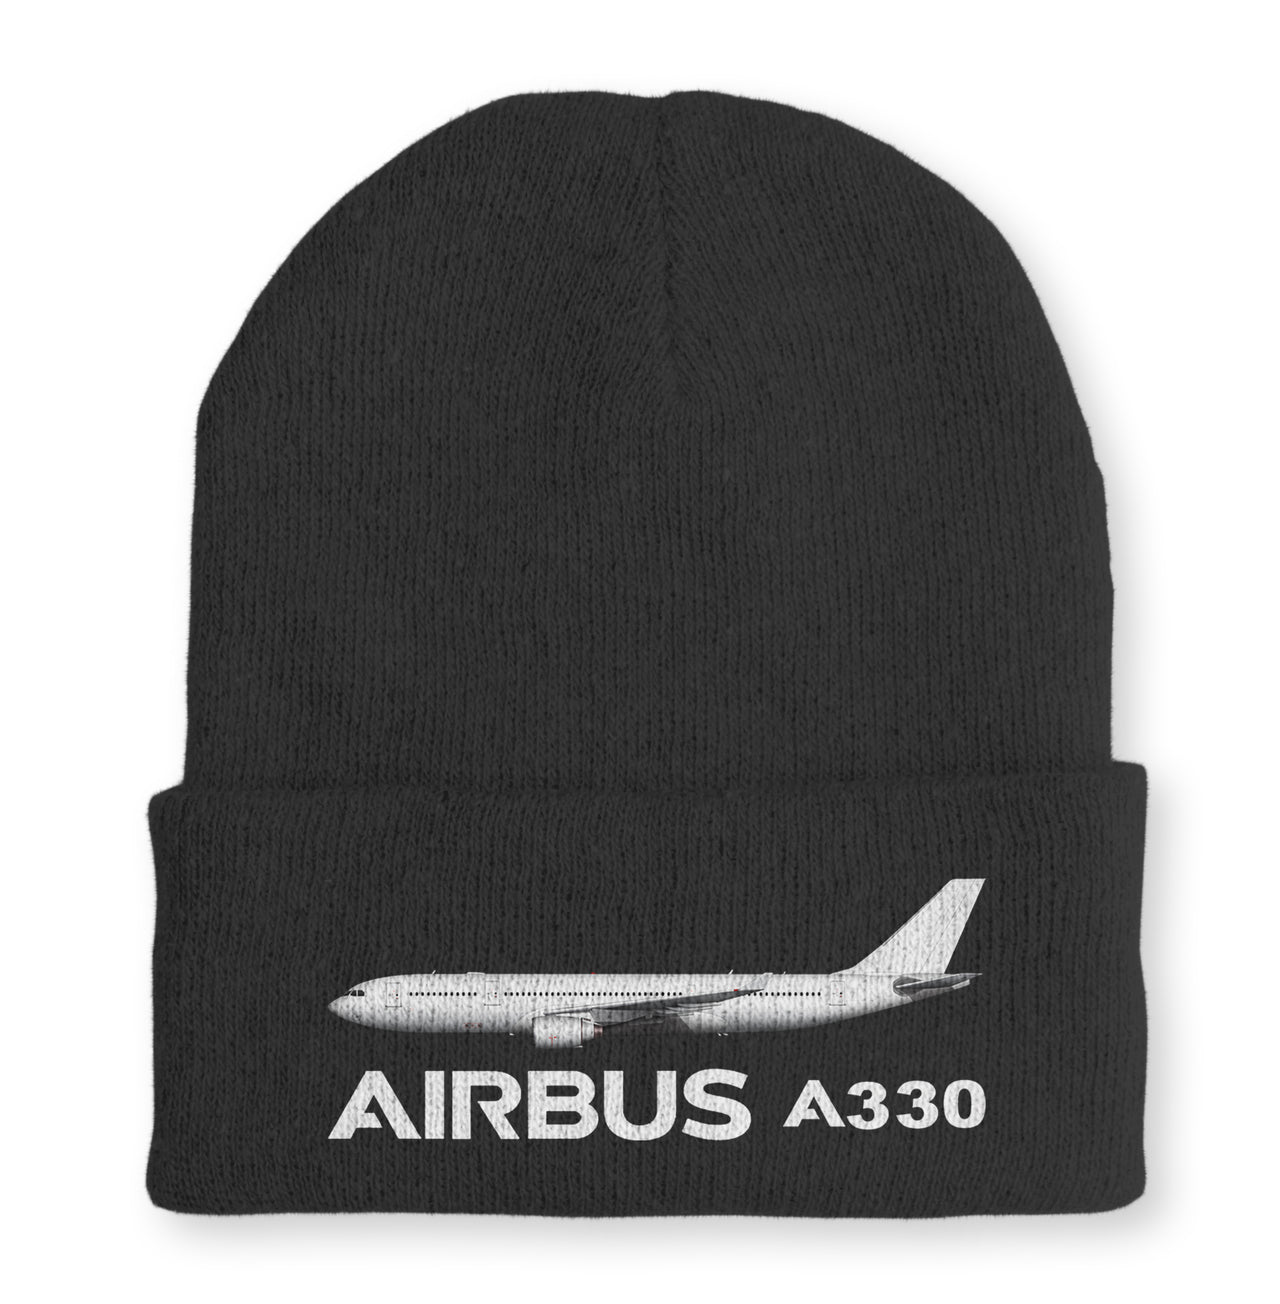 The Airbus A330 Embroidered Beanies